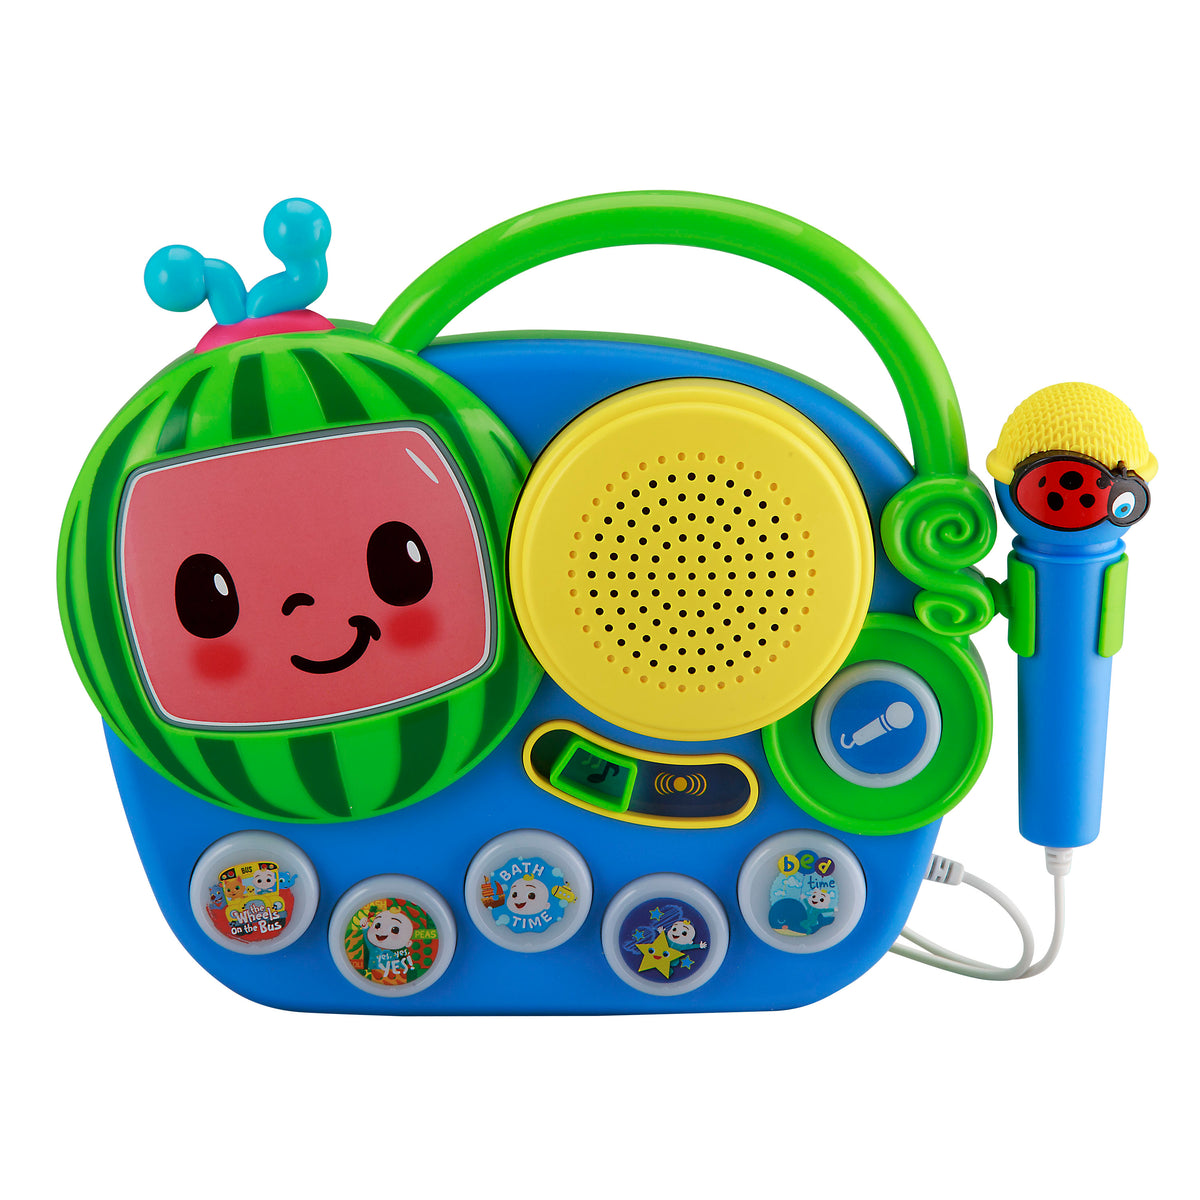 KIDdesigns CoCoMelon My First Sing Along Boombox for Kids - Multi-color